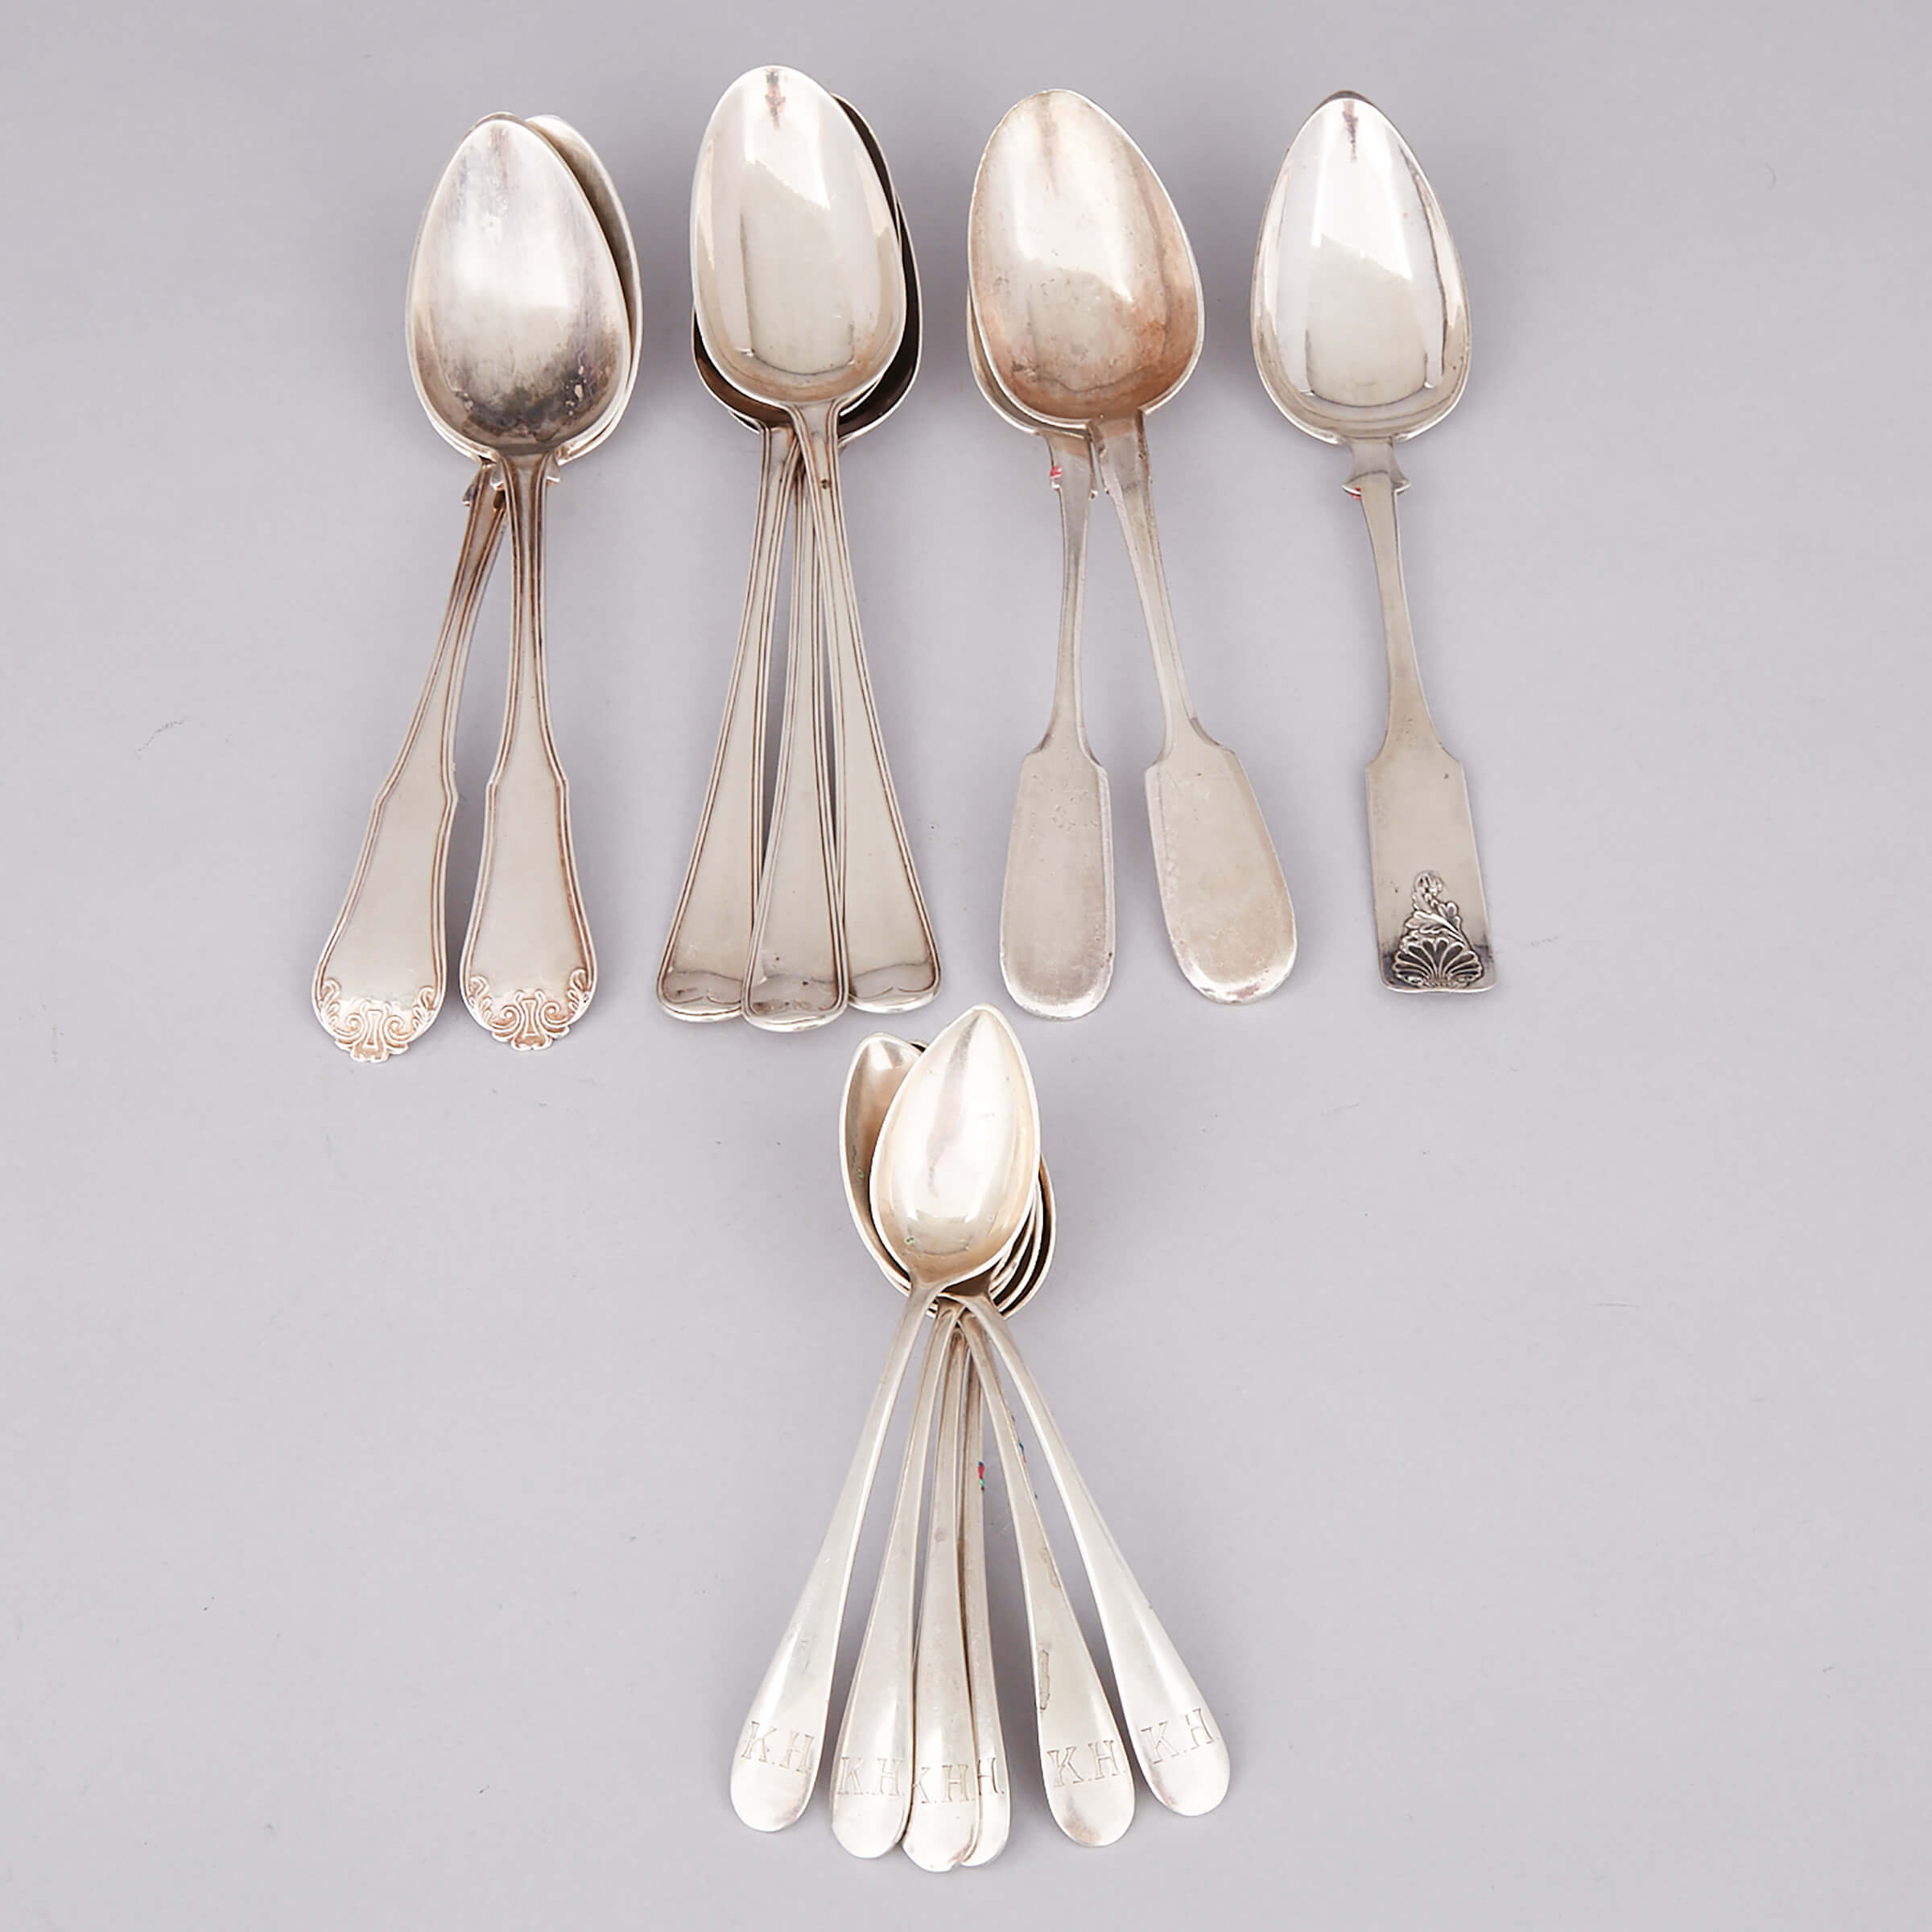 Eight Continental European, Russian and Chinese Export Silver Table Spoons and Six Tea Spoons, 19th century